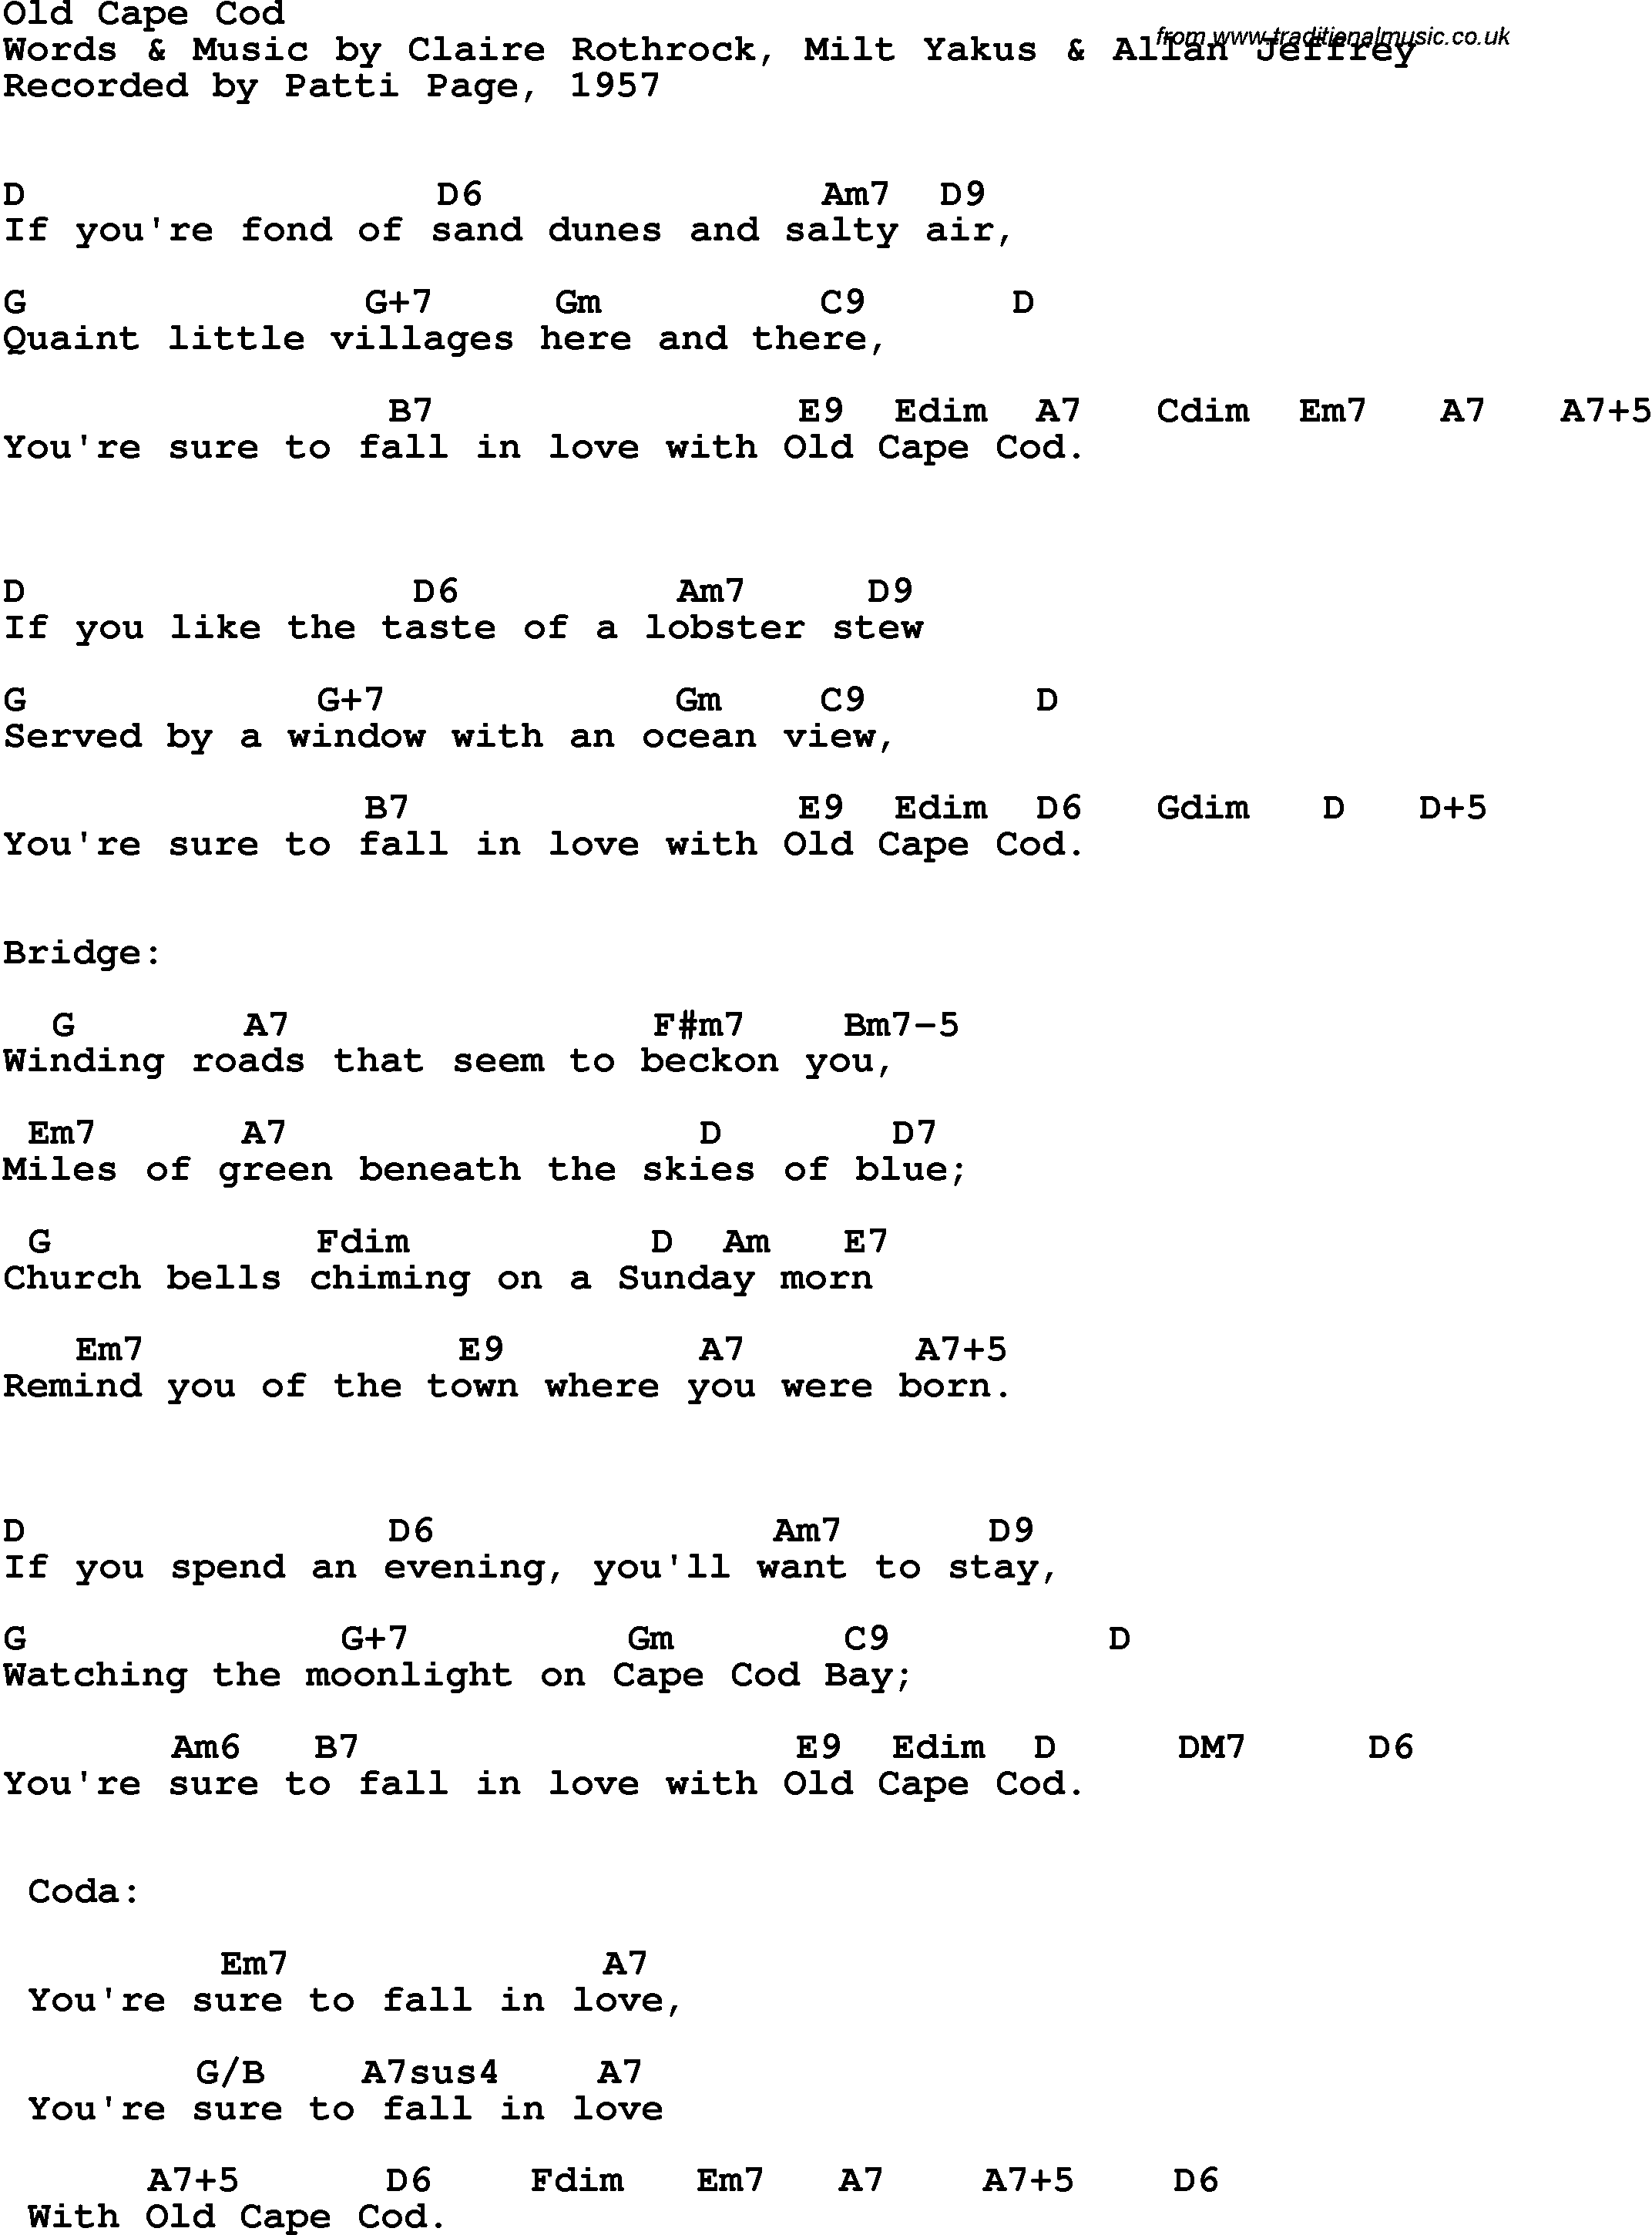 Song Lyrics with guitar chords for Old Cape Cod - Patti Page, 1957